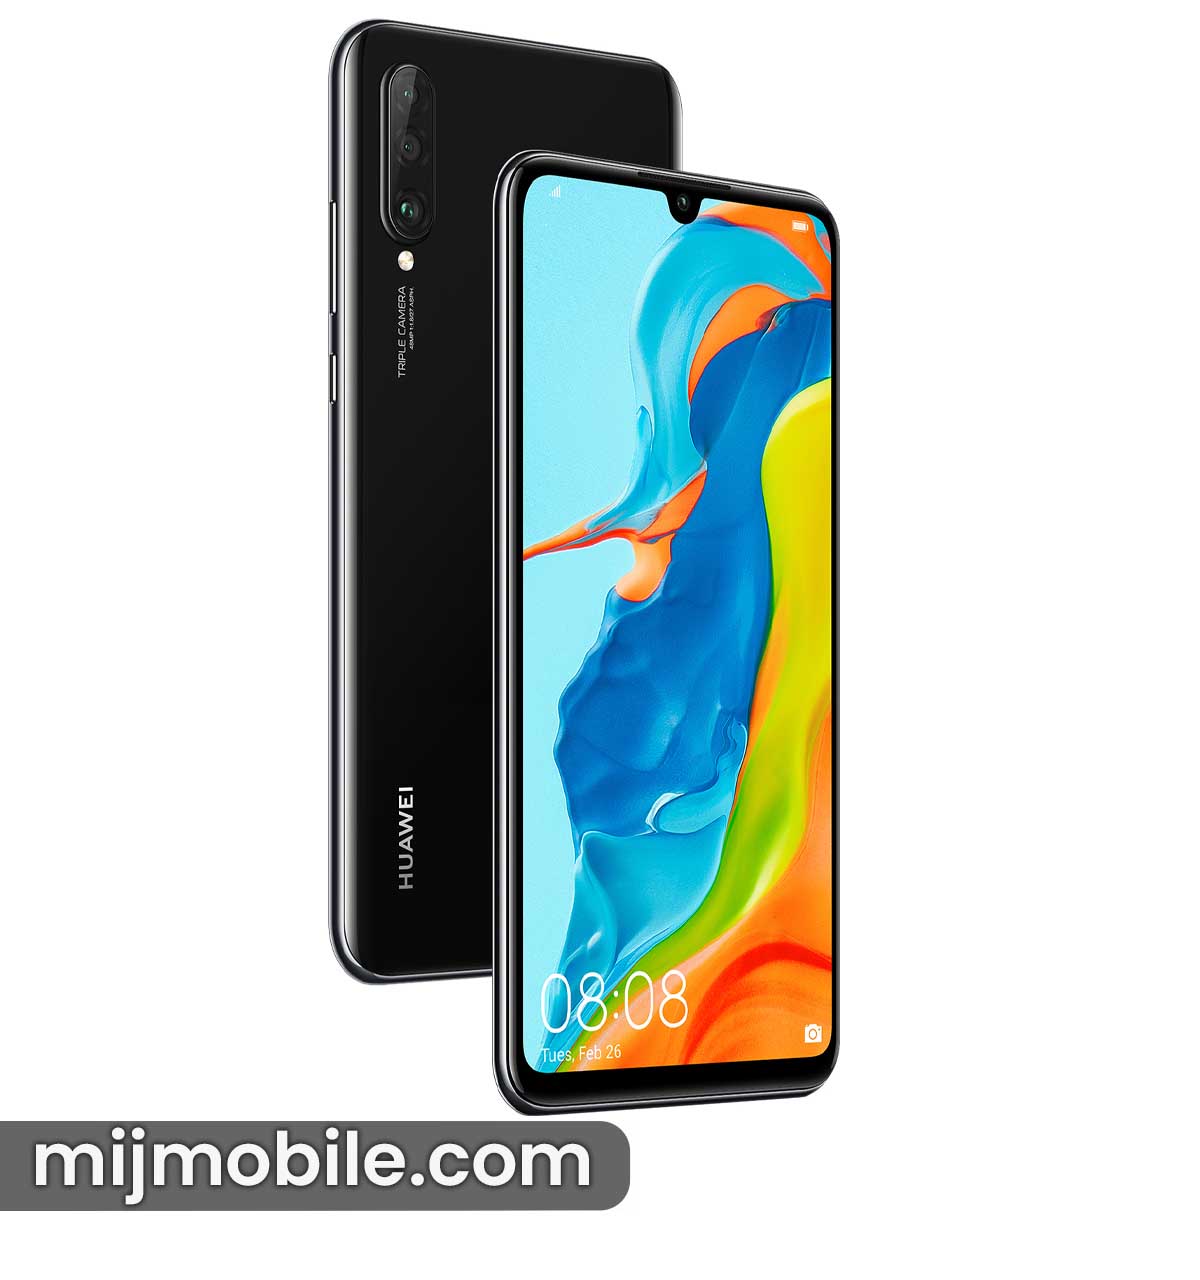 Huawei P30 Lite Price in Pakistan & Specifications Huawei P30 Lite Price in Pakistan is only 39,999.